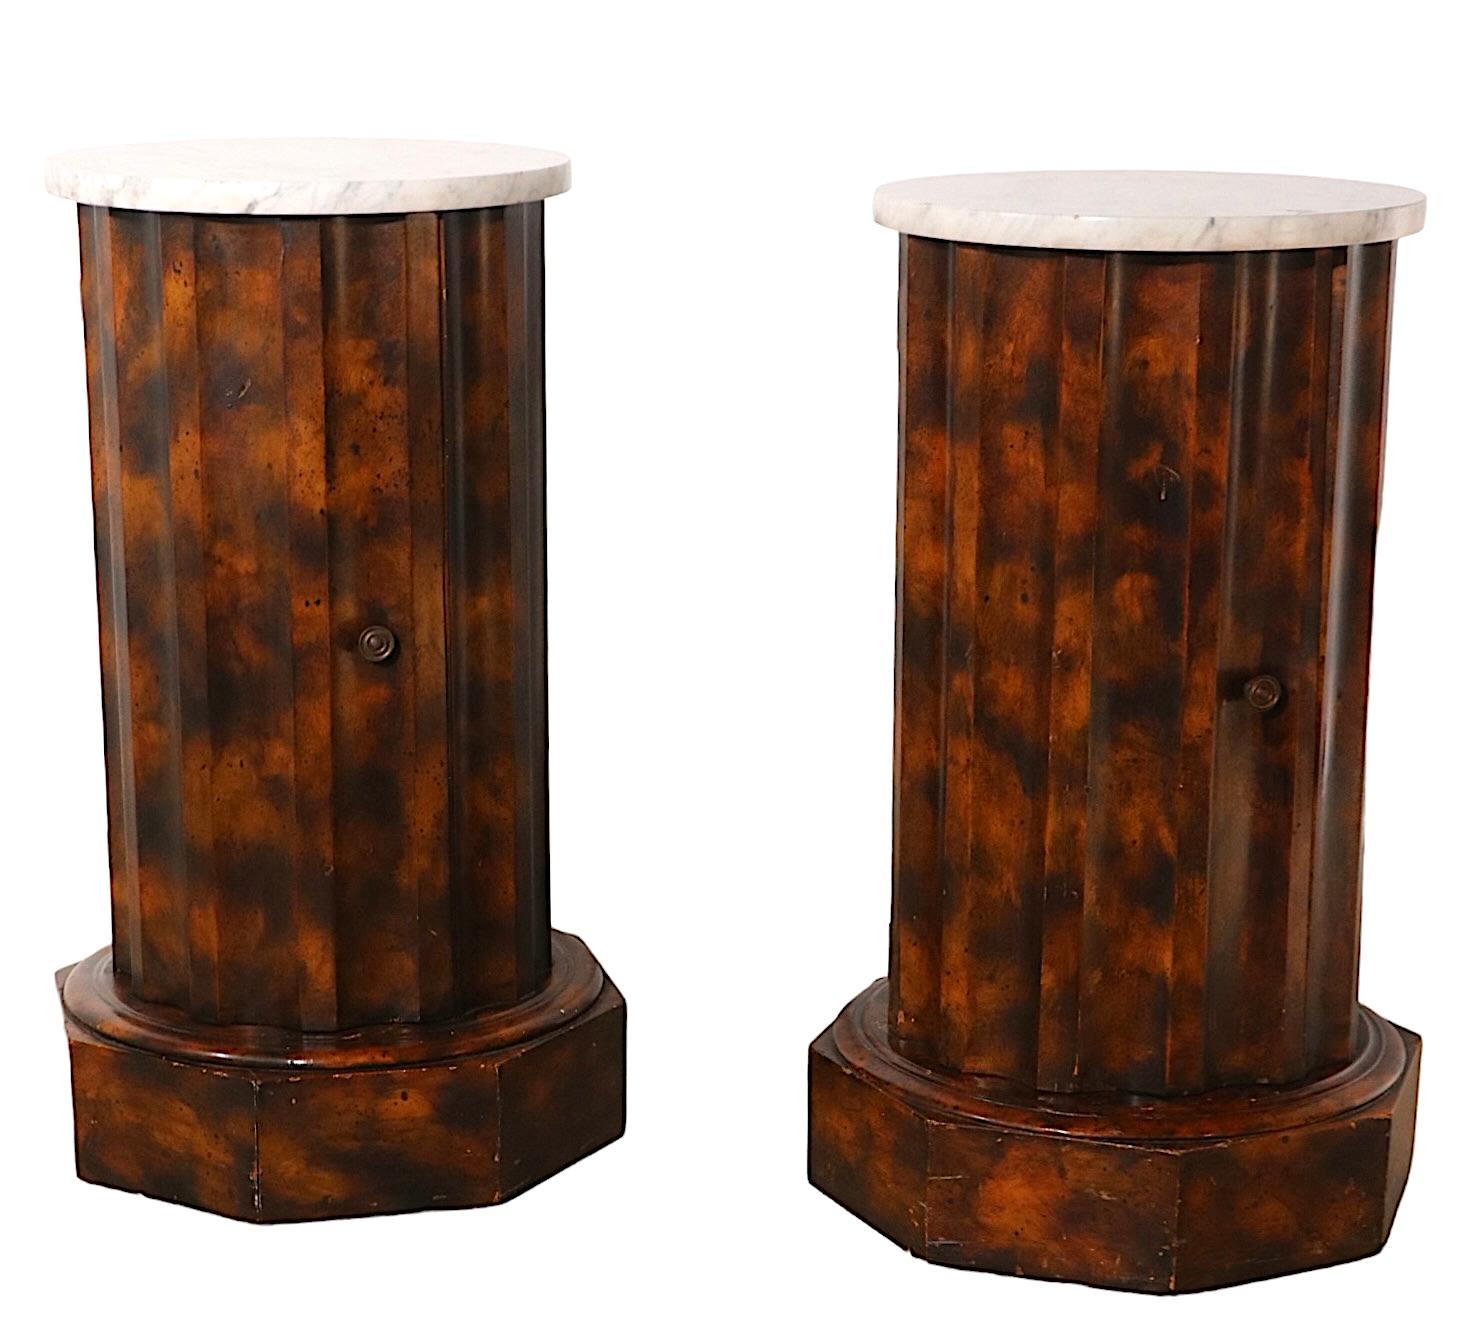 Pr. Decorative Marble Top Half Column Pedestals in Faux Tortoise Shell Finish For Sale 2